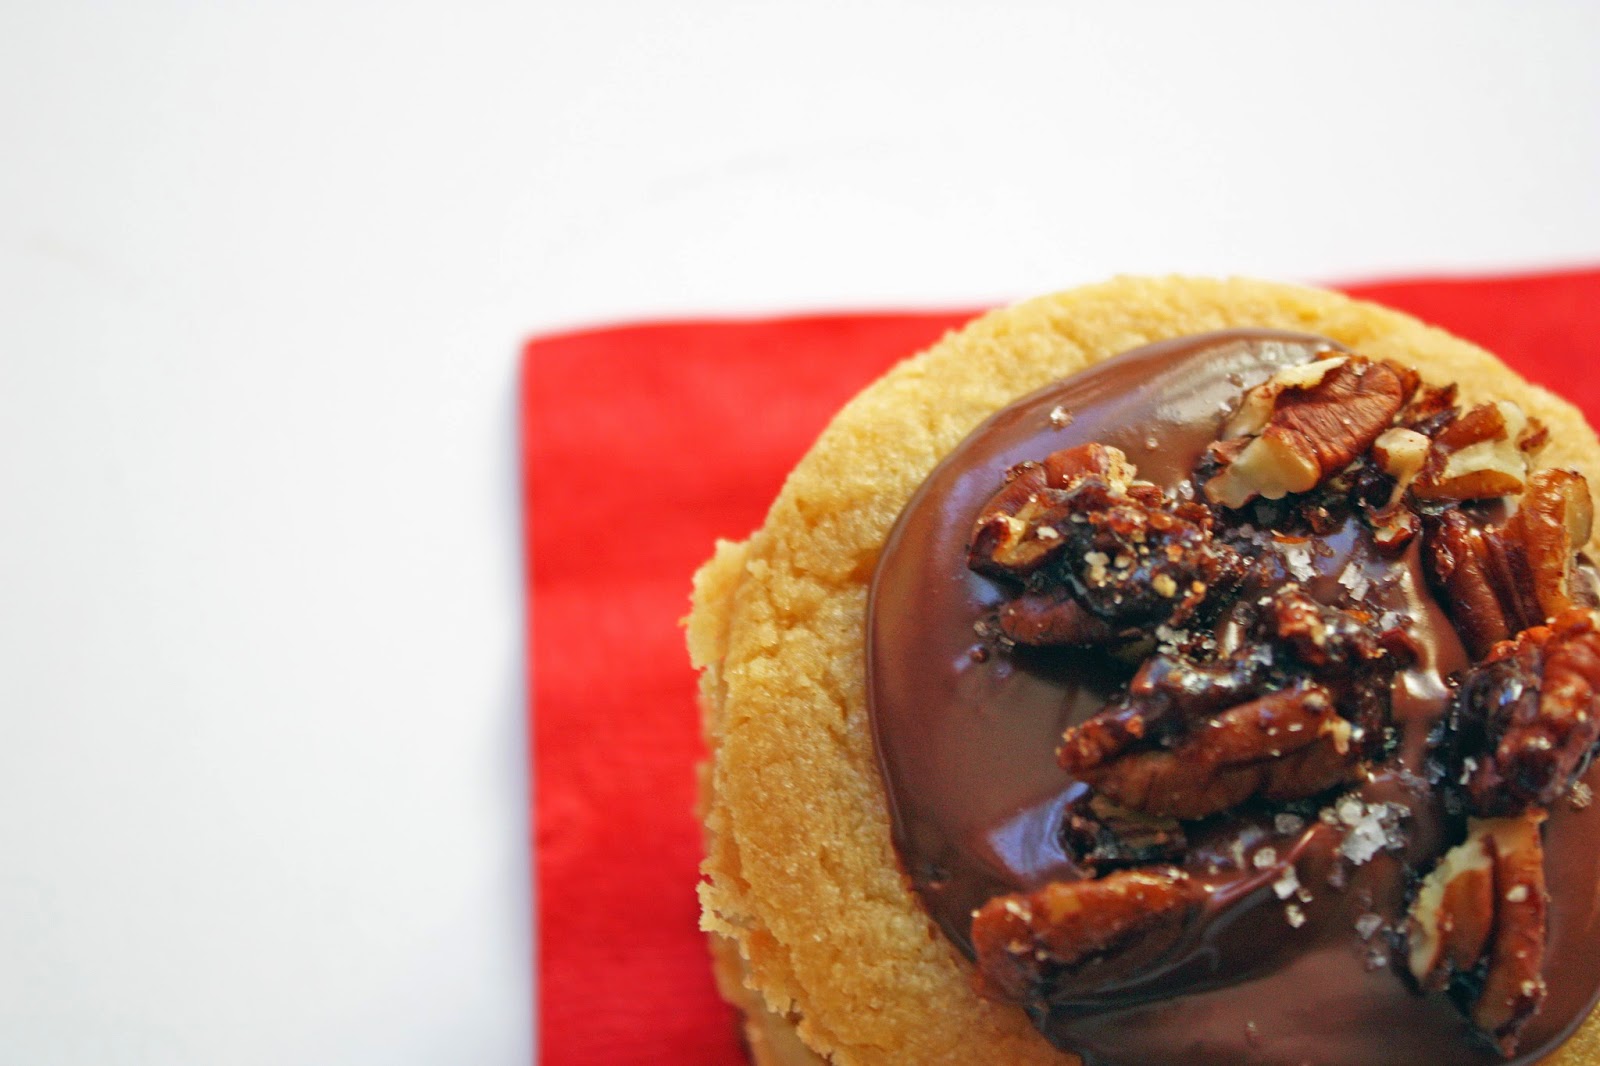 salty sweet toffee cookies with dark chocolate glaze and candied pecans